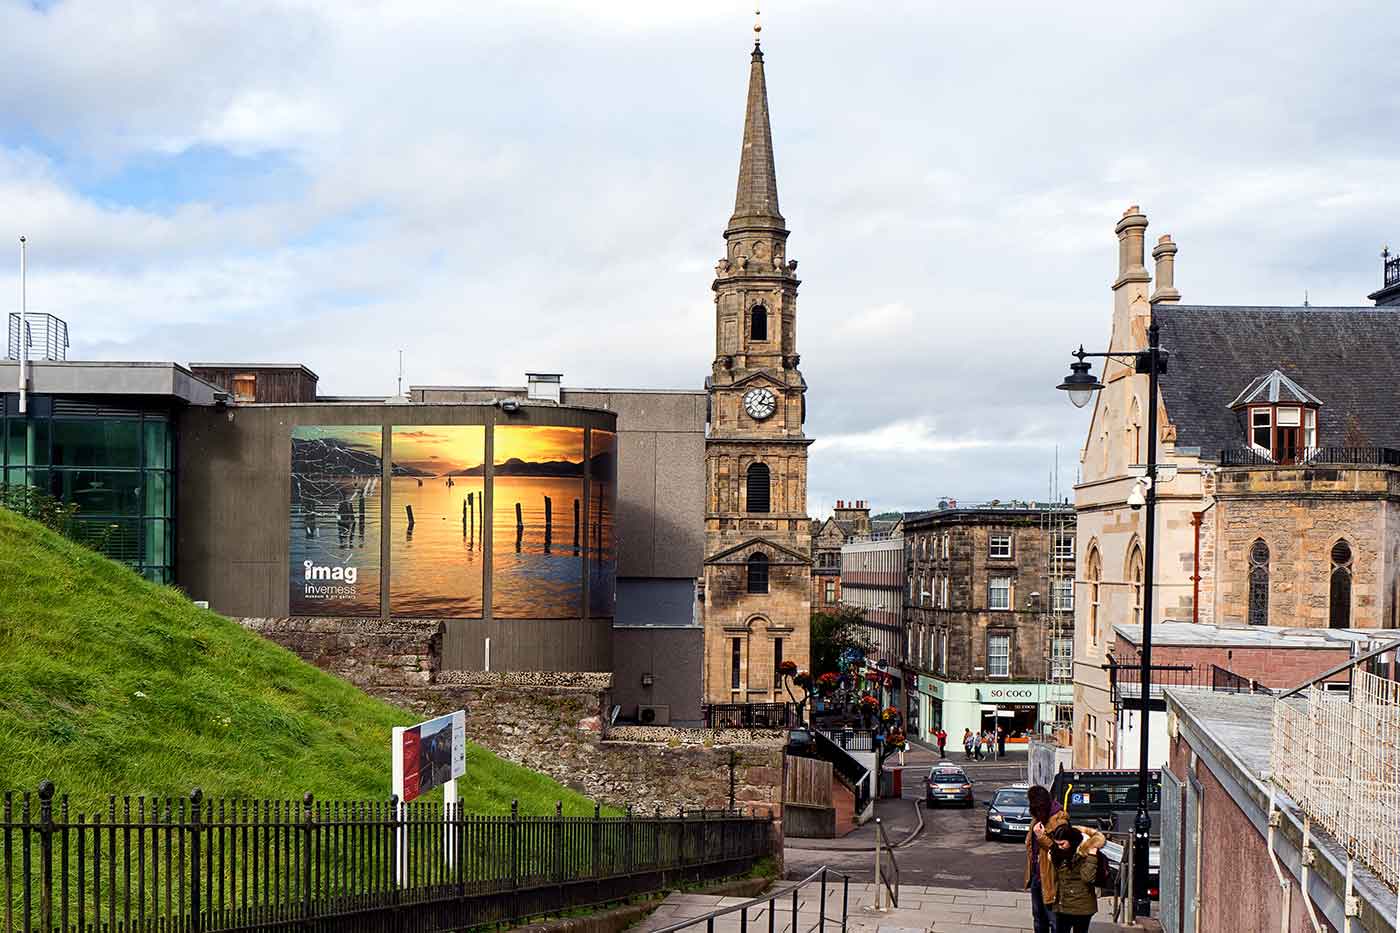 Inverness Museum and Art Gallery